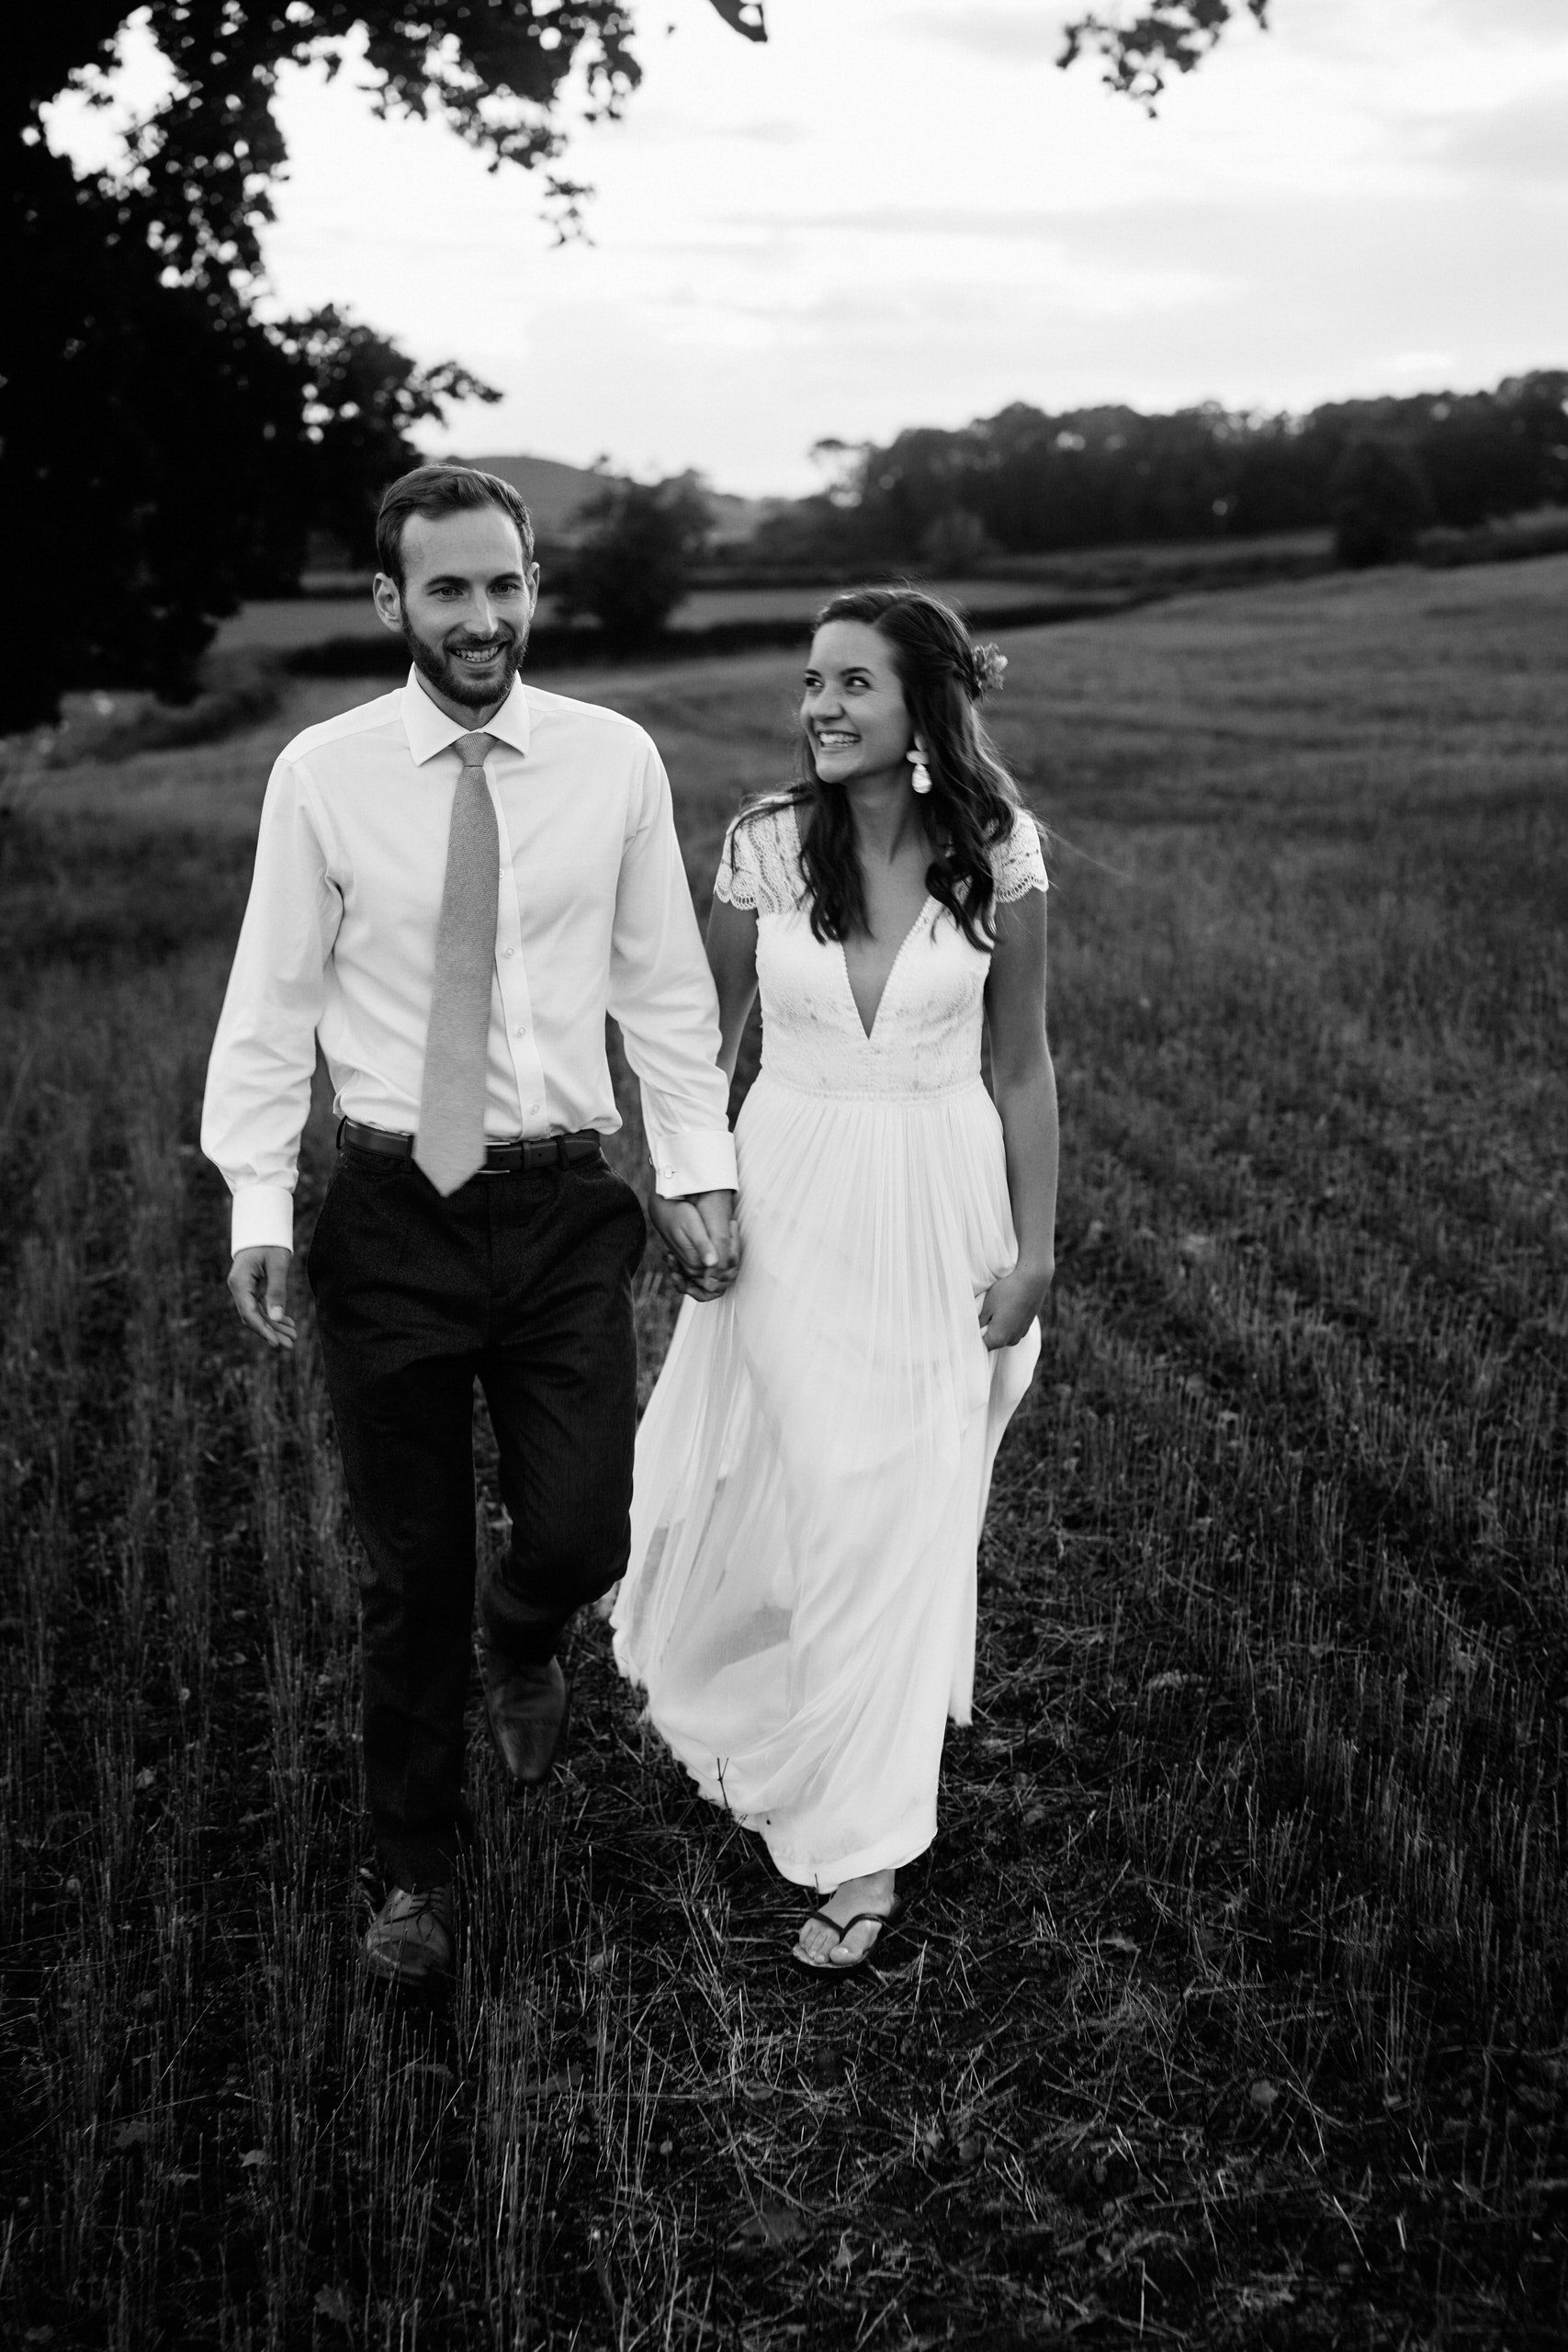 A black and white picture of a couple in their wedding attire walking in a field.